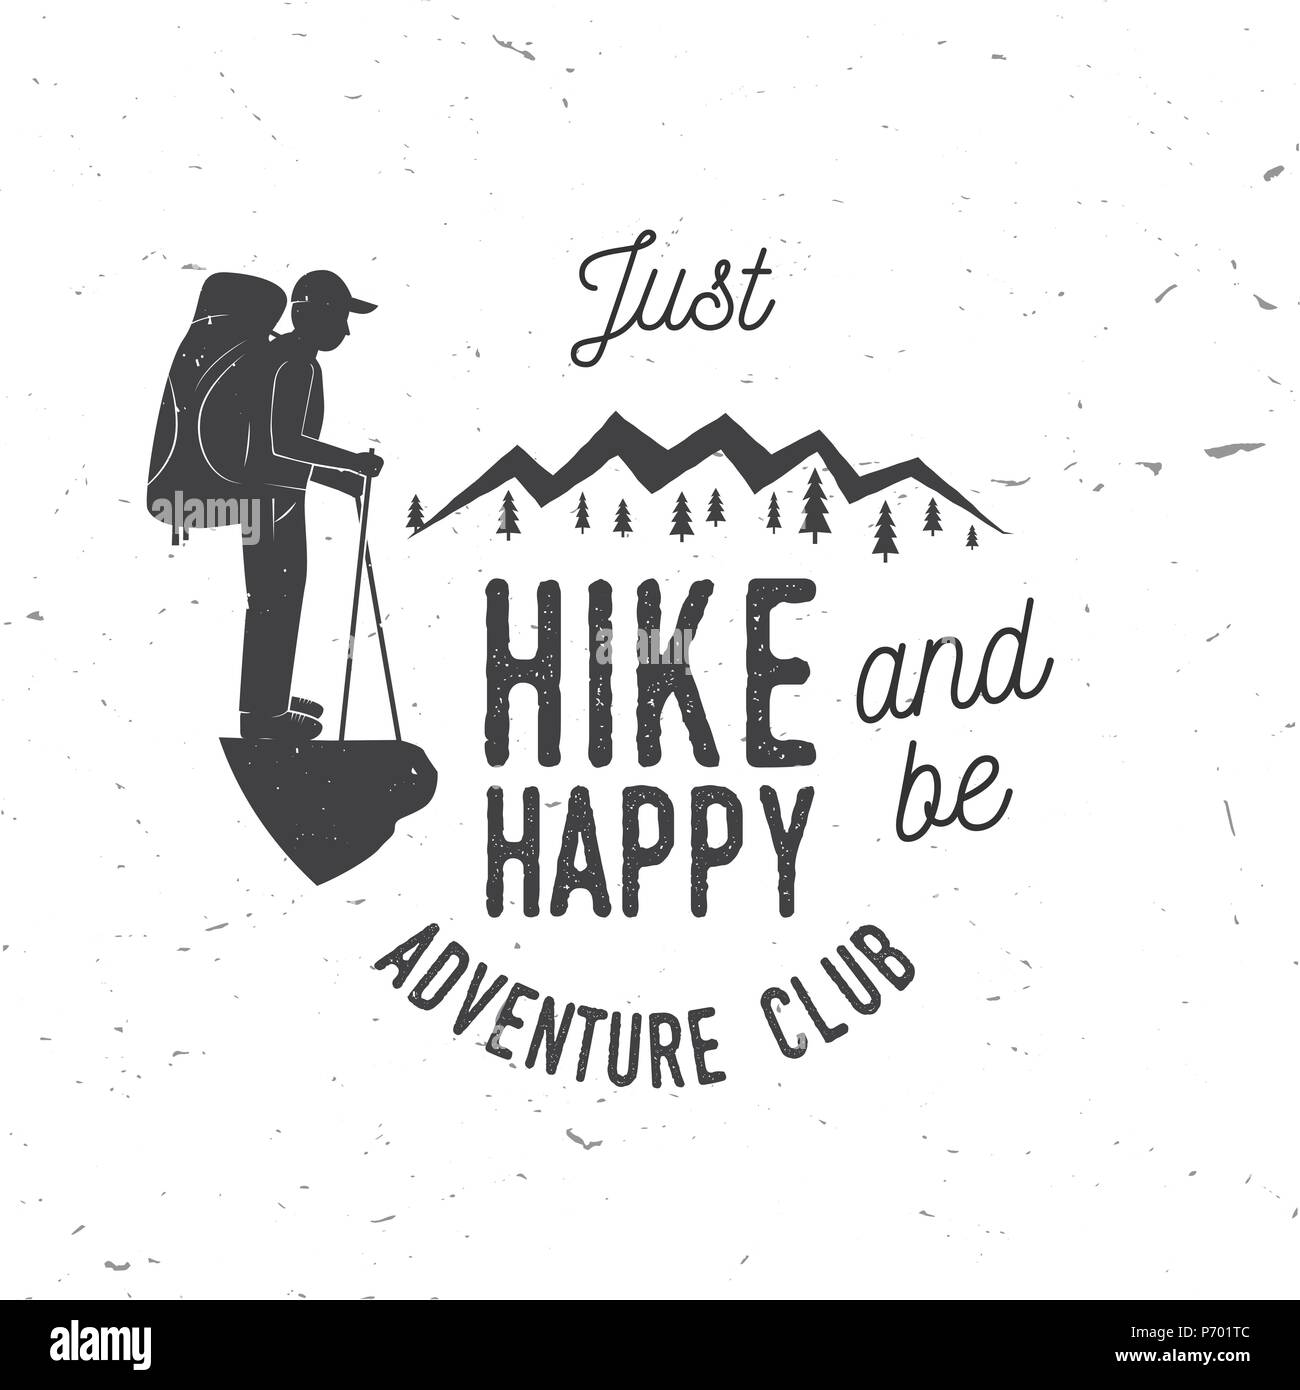 Just Hike and be Happy. Adventure club. Mountains related typographic quote. Vector illustration. Concept for shirt or logo, print, stamp. Stock Vector